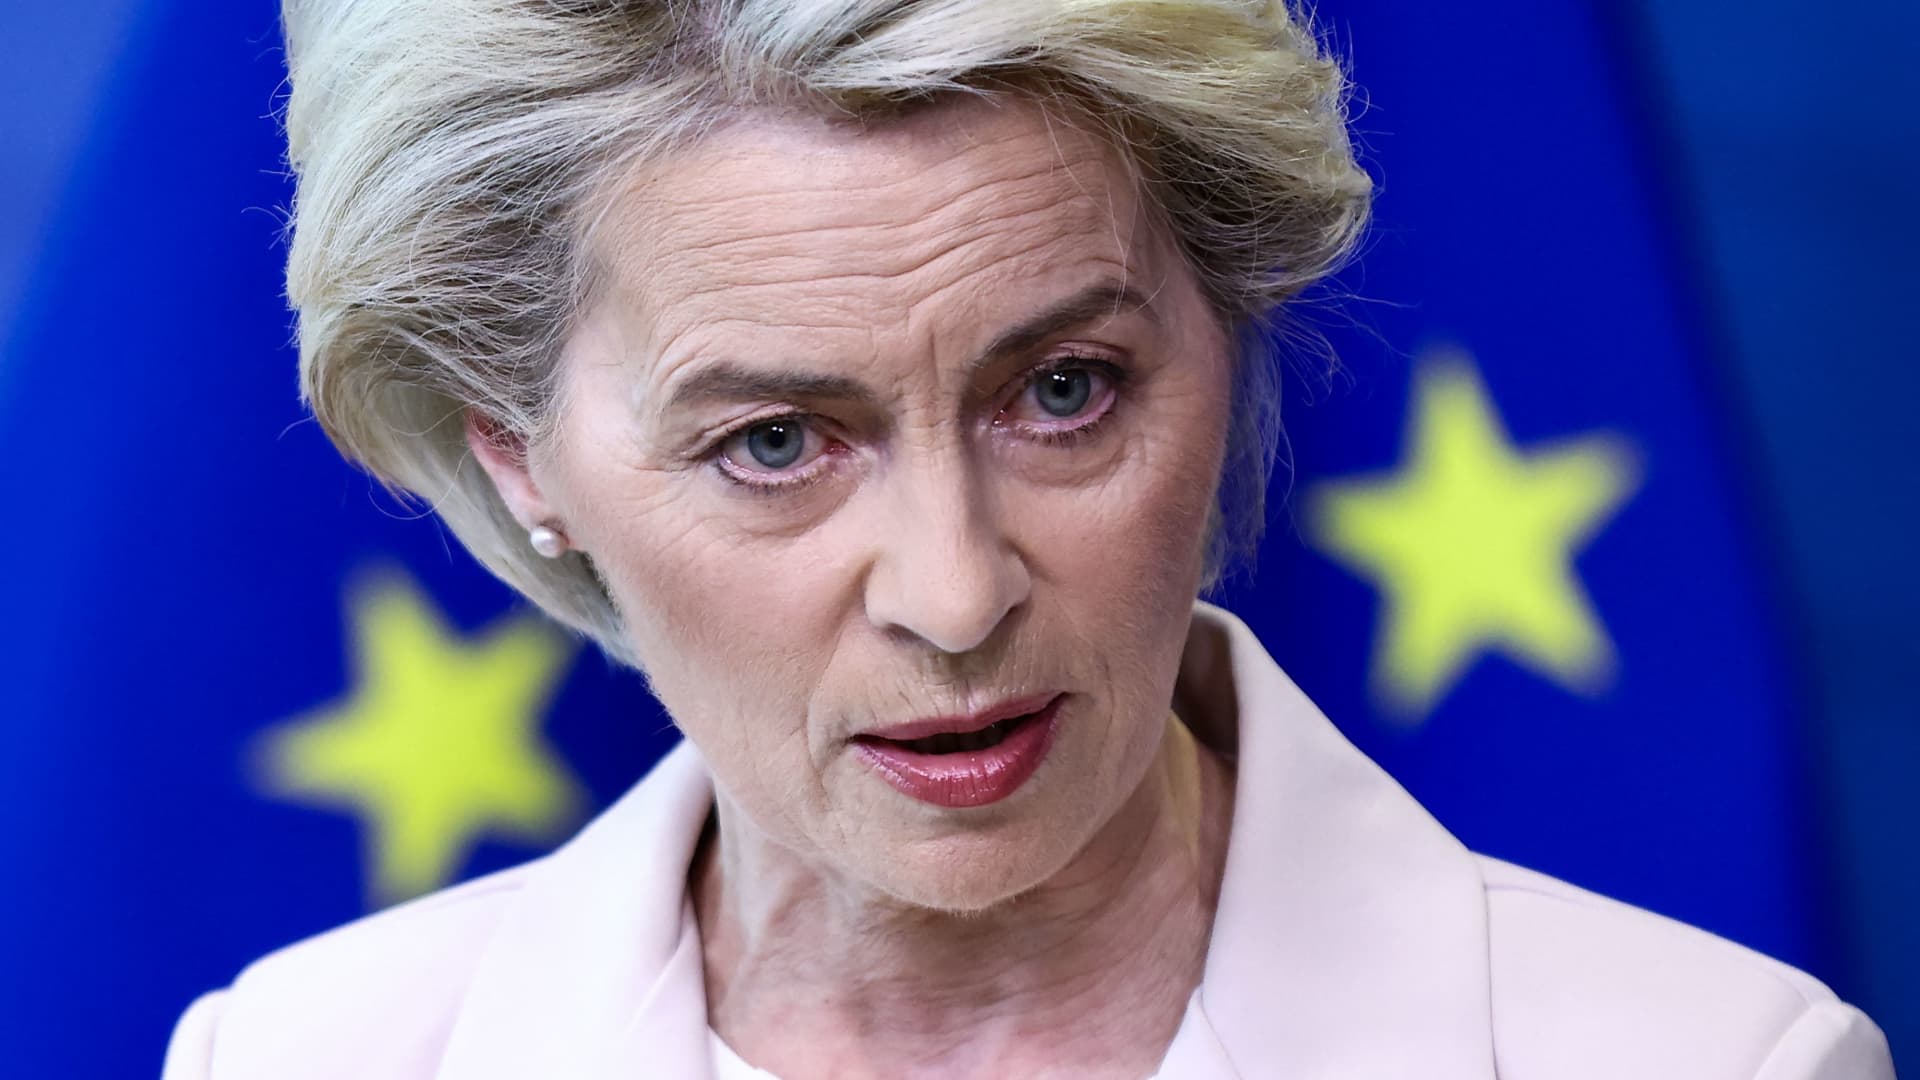 European Commission President Ursula von der Leyen makes a statement in Brussels on April 27, 2022, following the decision by Russian energy giant Gazprom to halt gas shipments to Poland and Bulgaria in Moscow's latest use of gas as a weapon in the conflict in Ukraine.